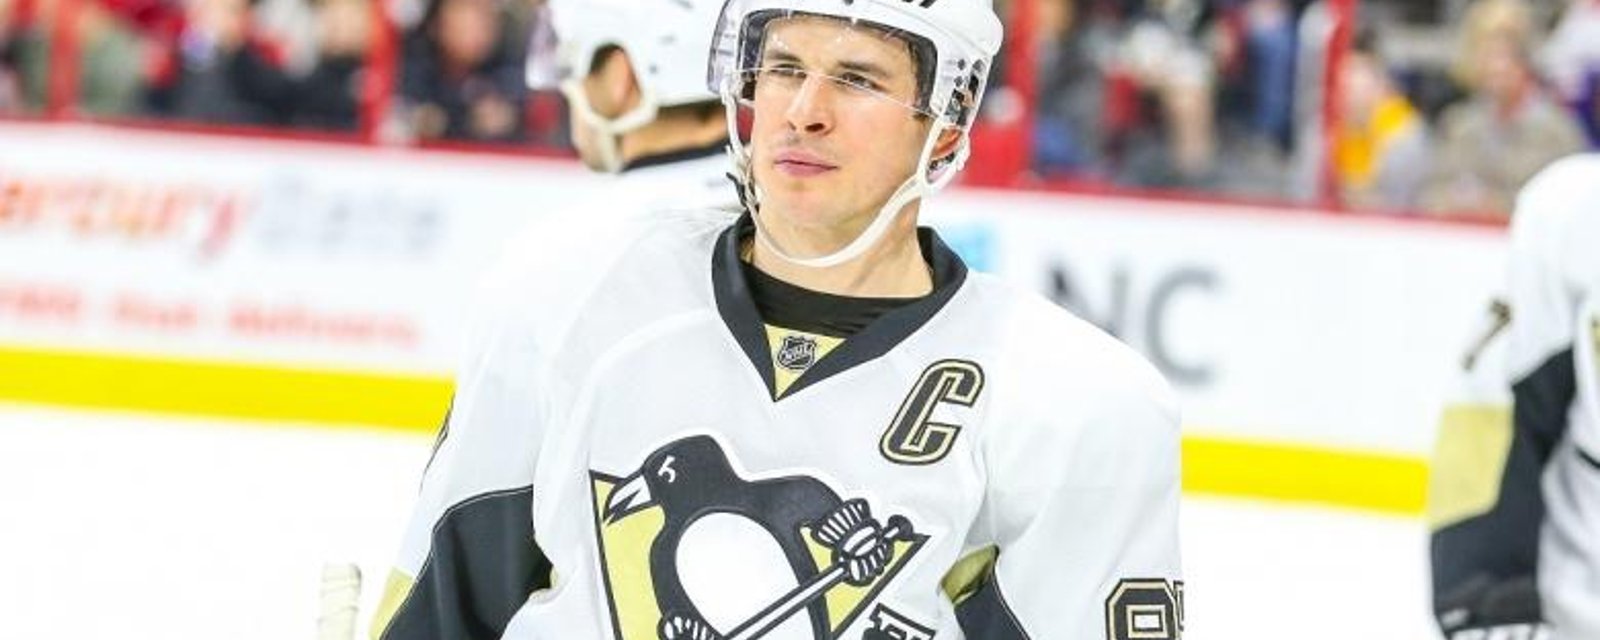 Crosby responds to questions about performance enhancing drugs.